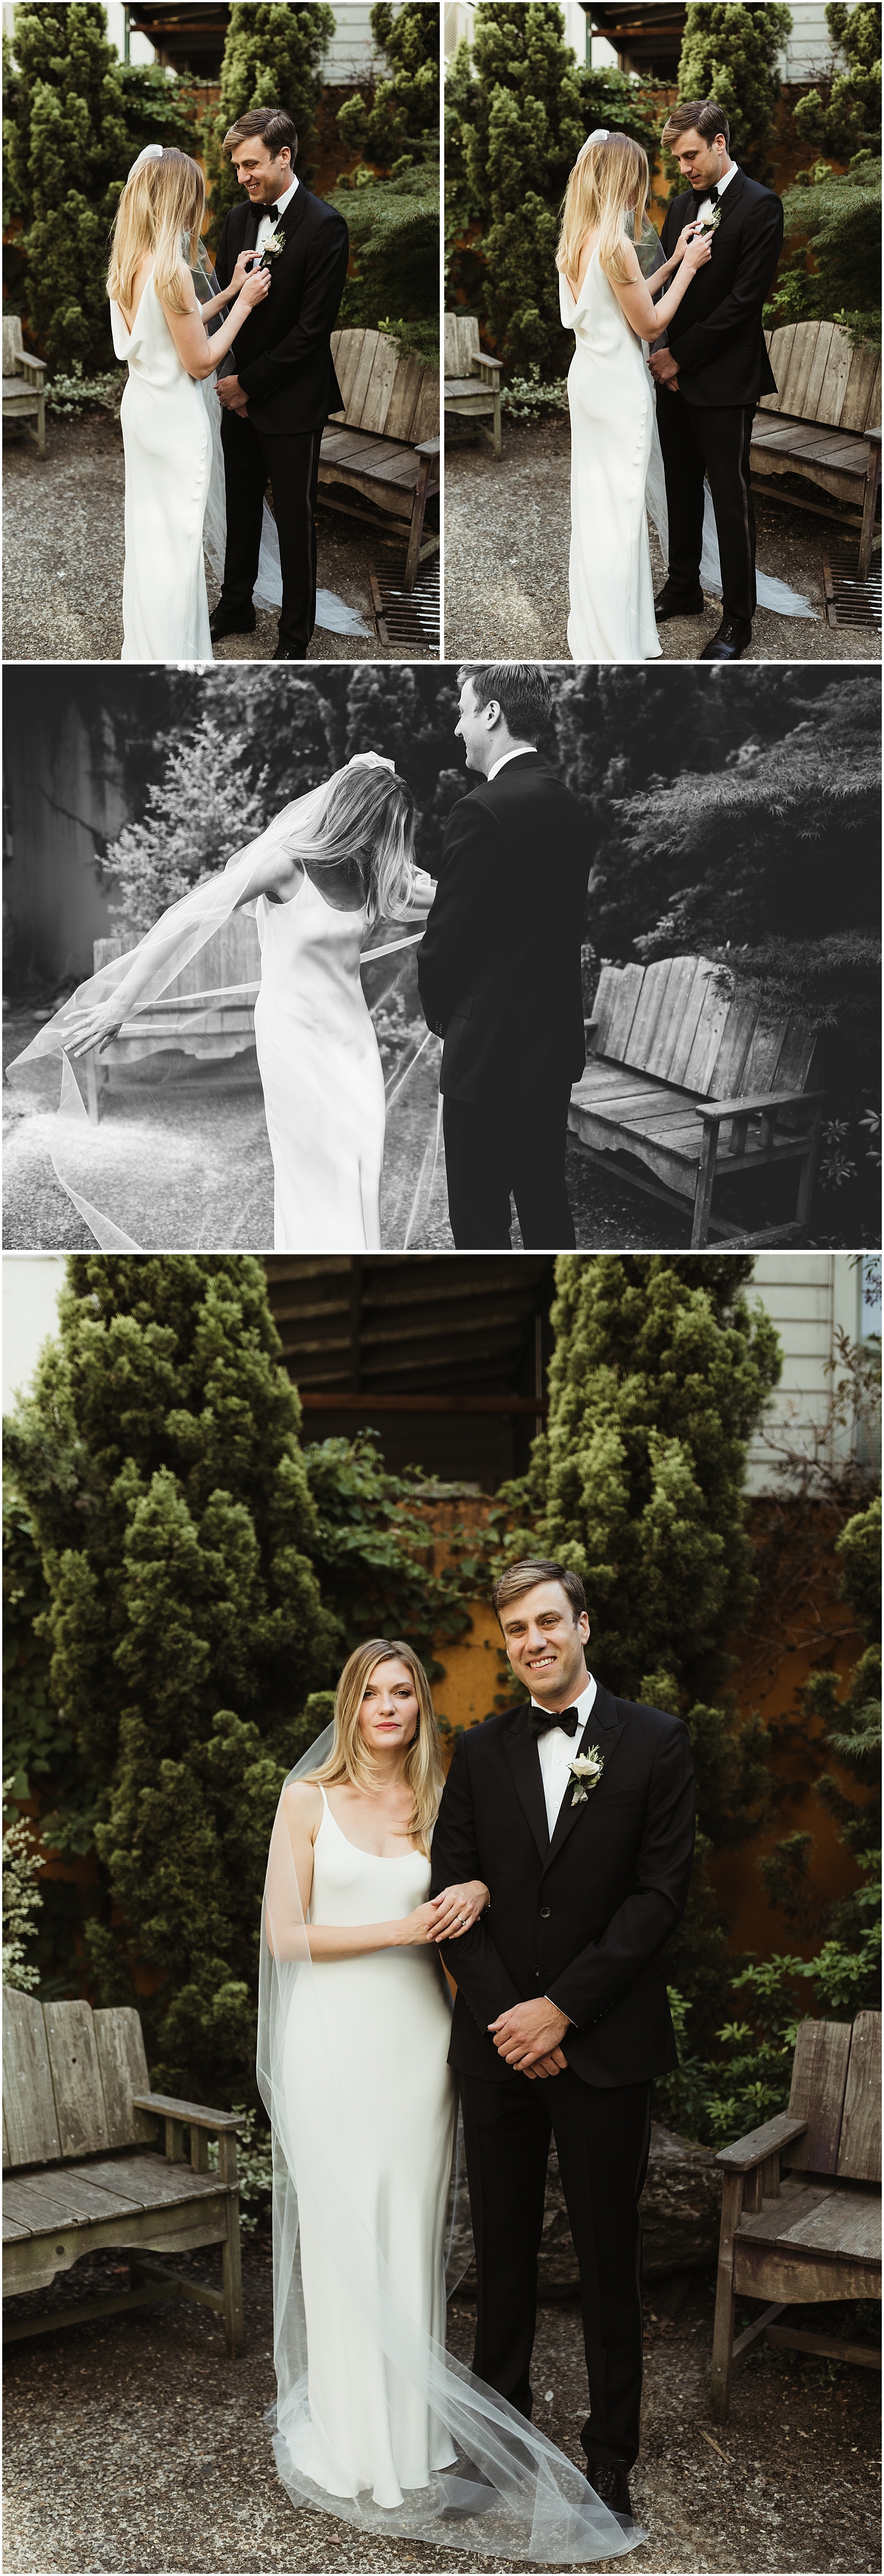 Elegant and modern wedding portraits in Downtown Portland, OR // Kate Ames Photography